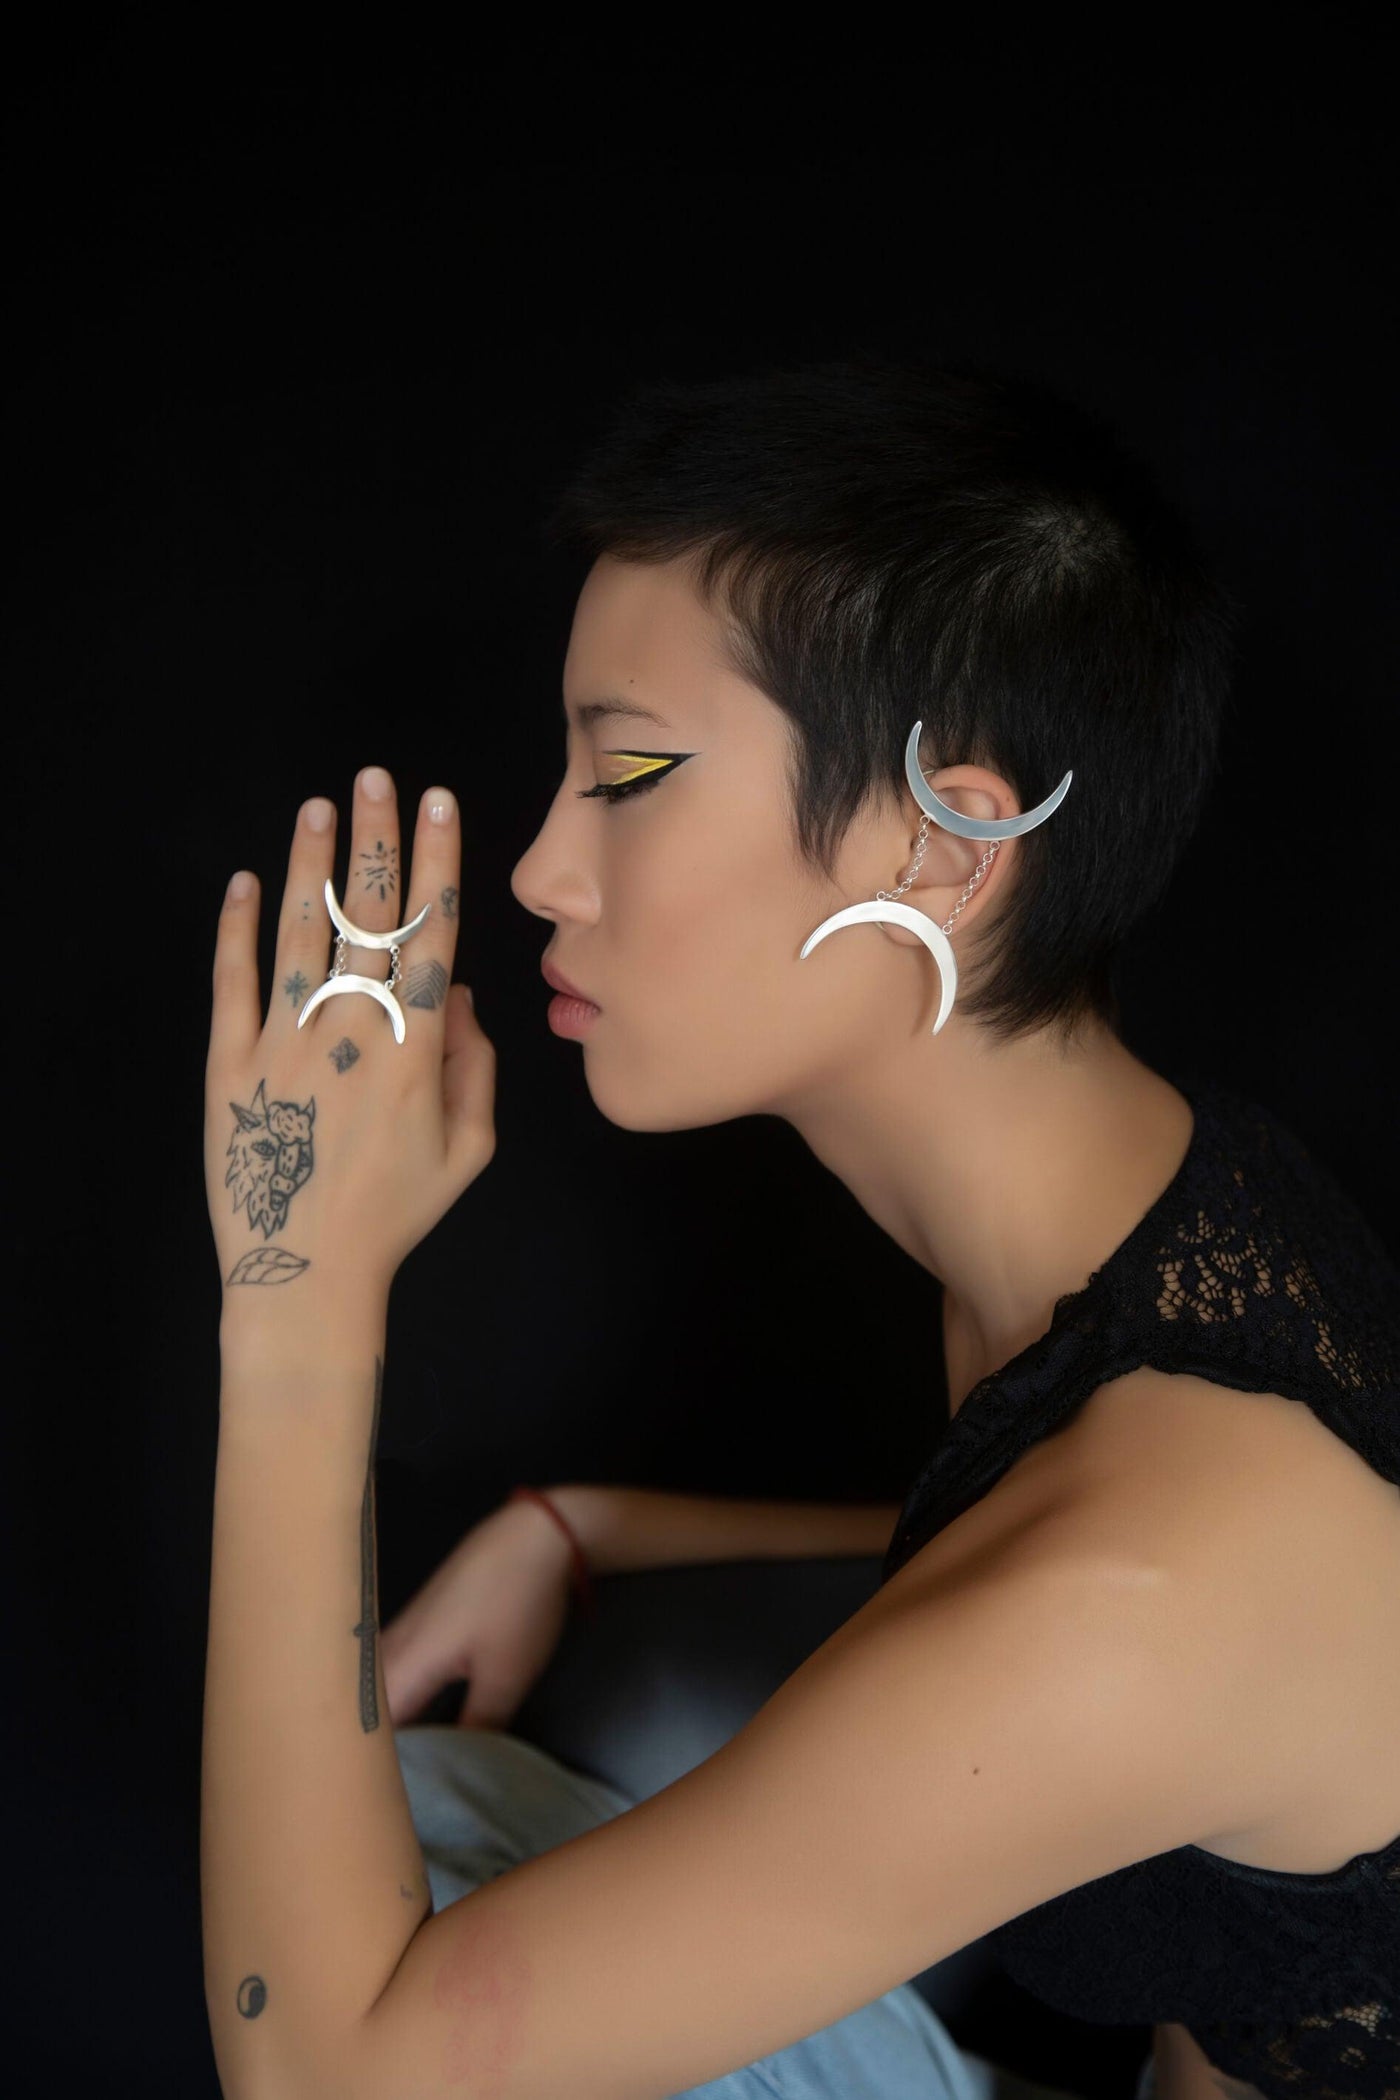 Gemini Avant-garde Ring & Ear Cuffs - Ethically handmade of Sterling Silver 925. Contemporary unique design of limited edition by Mystic J for your luxury look.